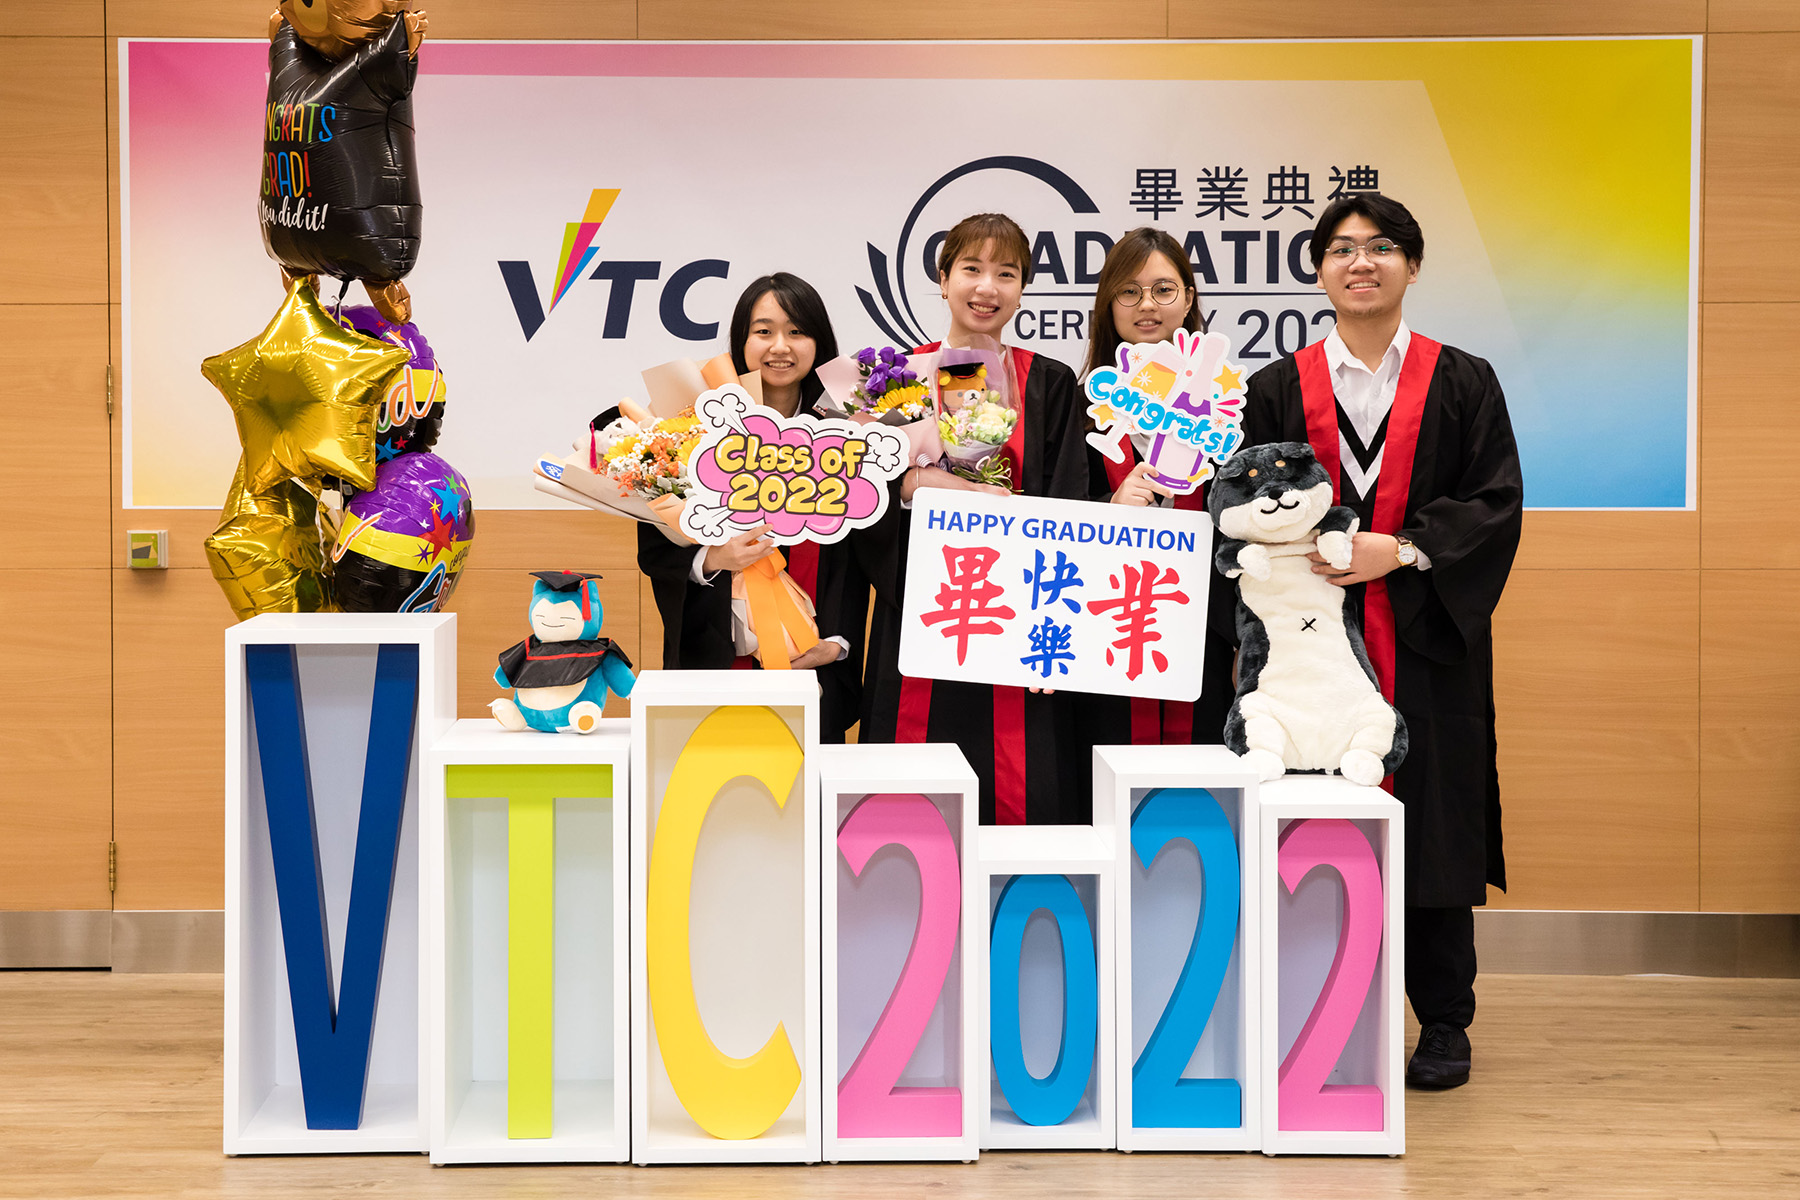 The VTC Graduation Ceremonies are being held in hybrid mode this year, with graduates able to share the joyful moments either on campus or online